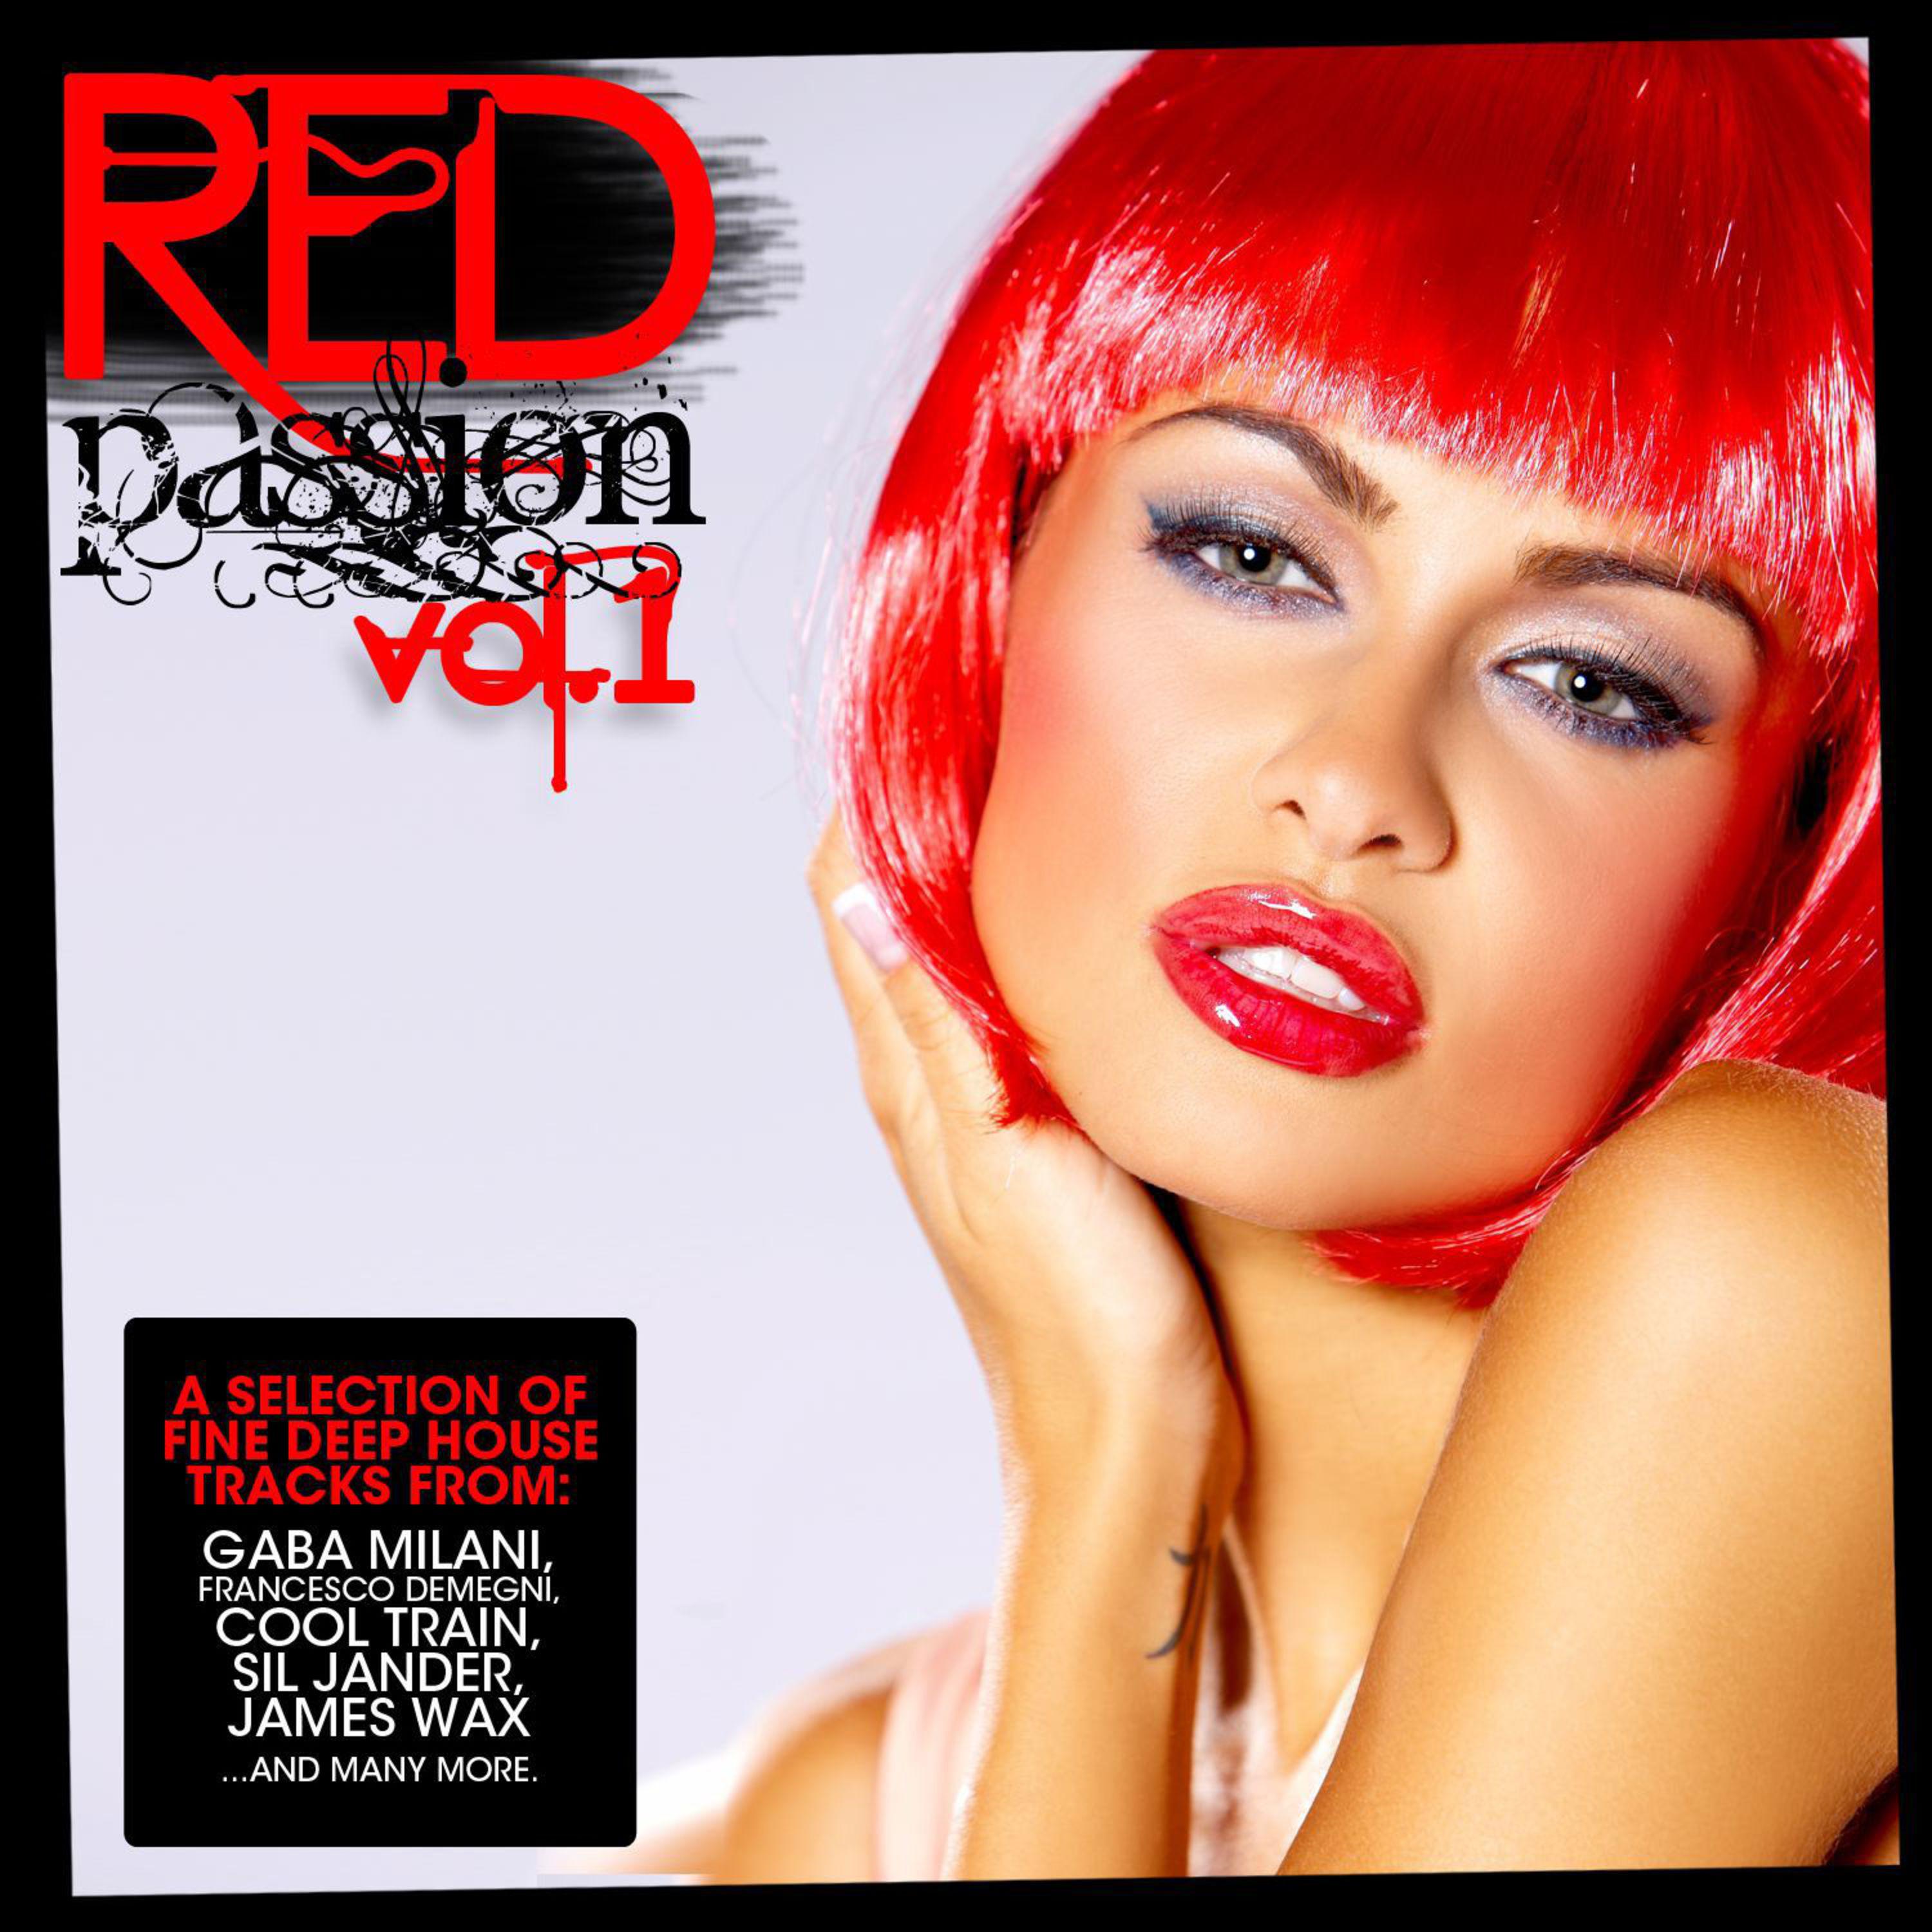 Red Passion Vol. 1 (A Selection of Fine Deep House Tracks)